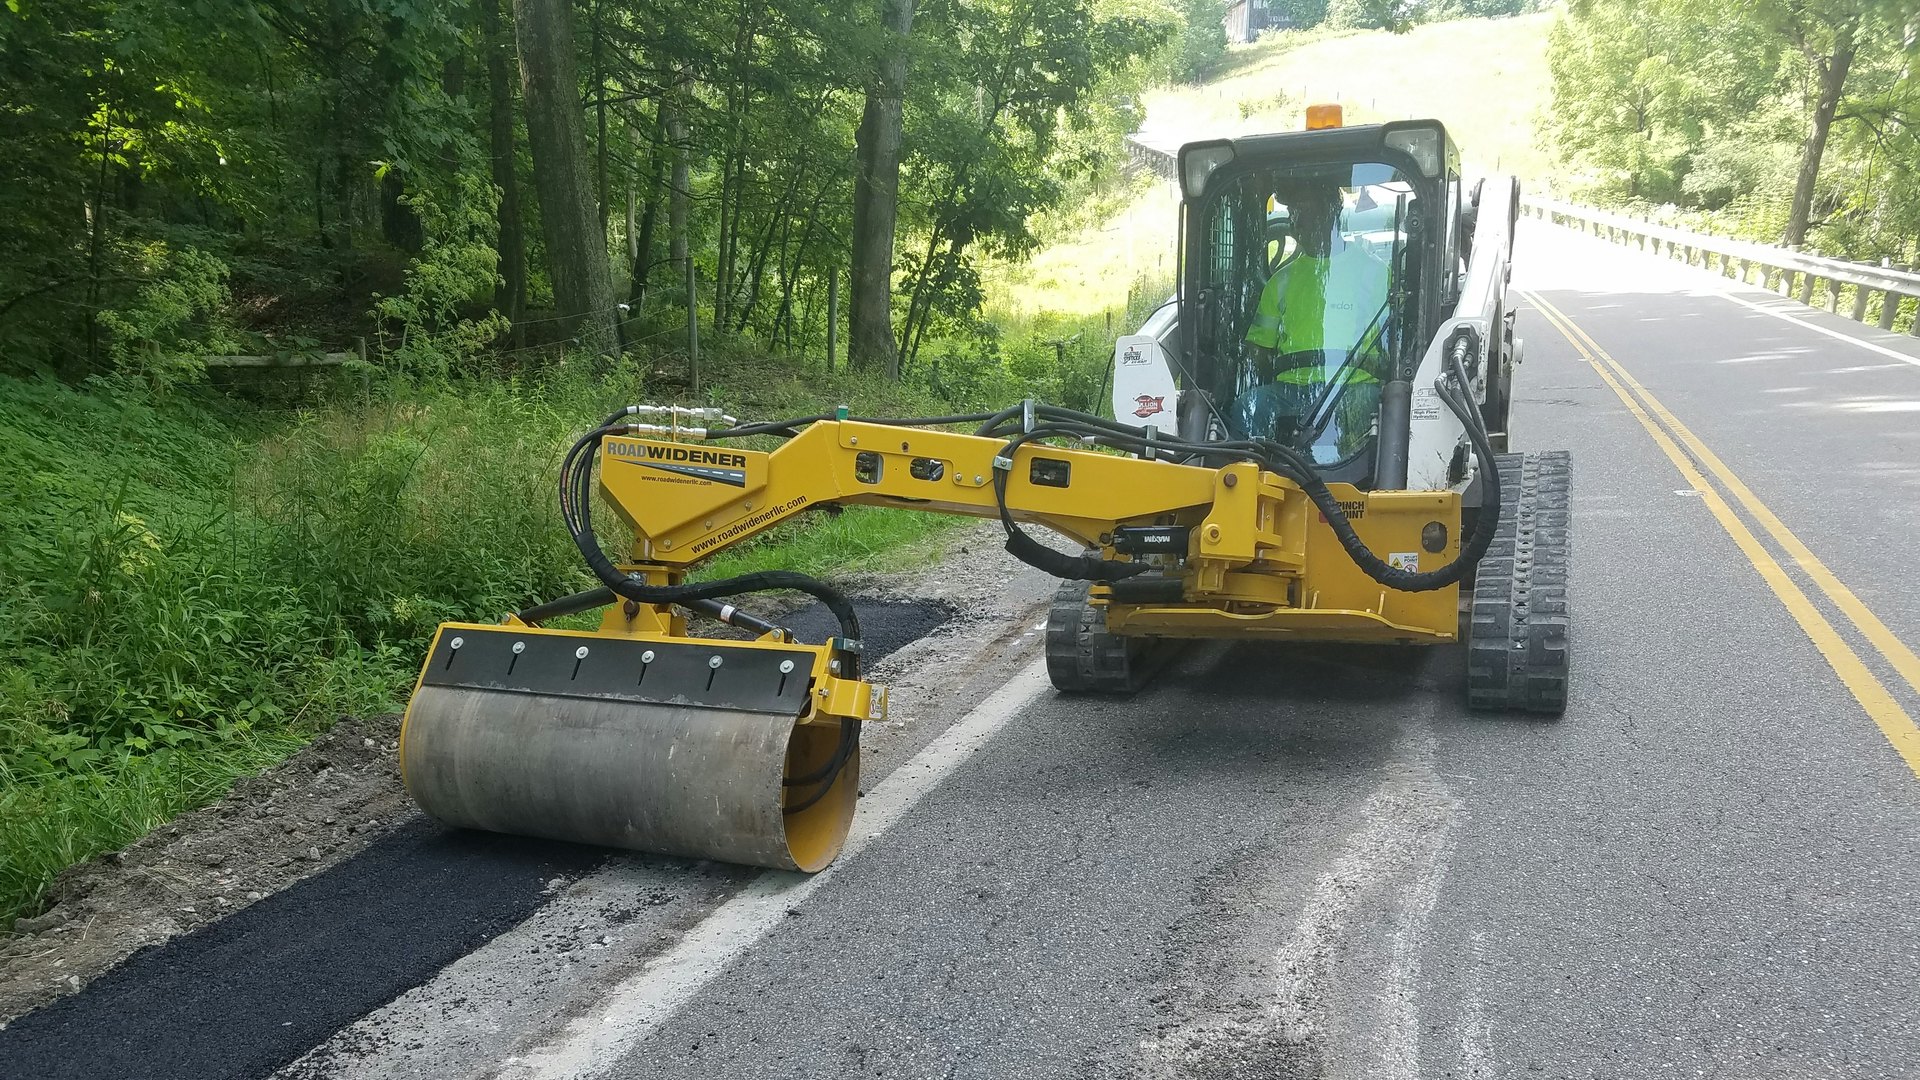 Roller vs Compactor: What's The Difference? - Roadskymaintenance